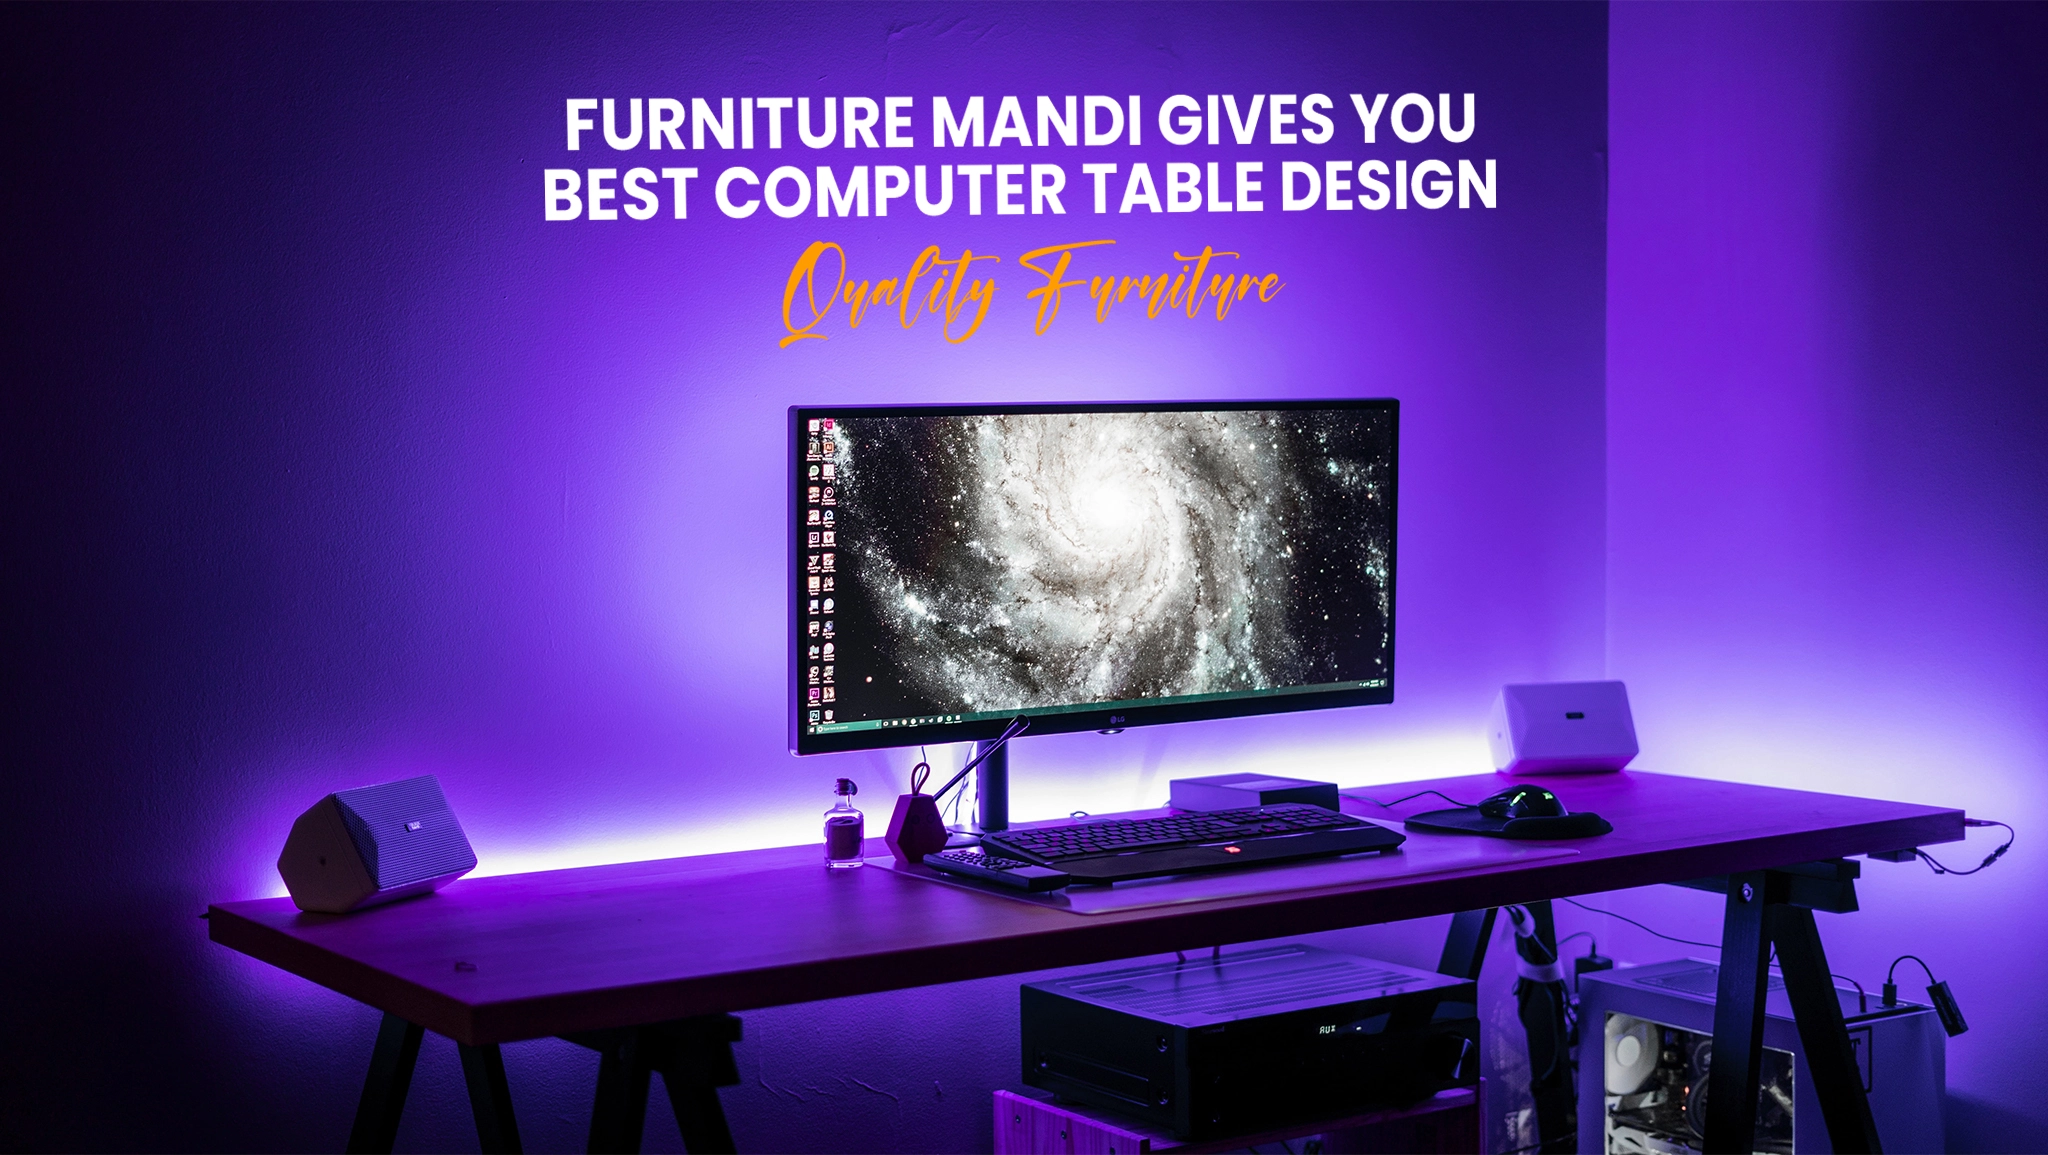 Furniture Mandi Gives you Best Computer Table Design in Pakistan